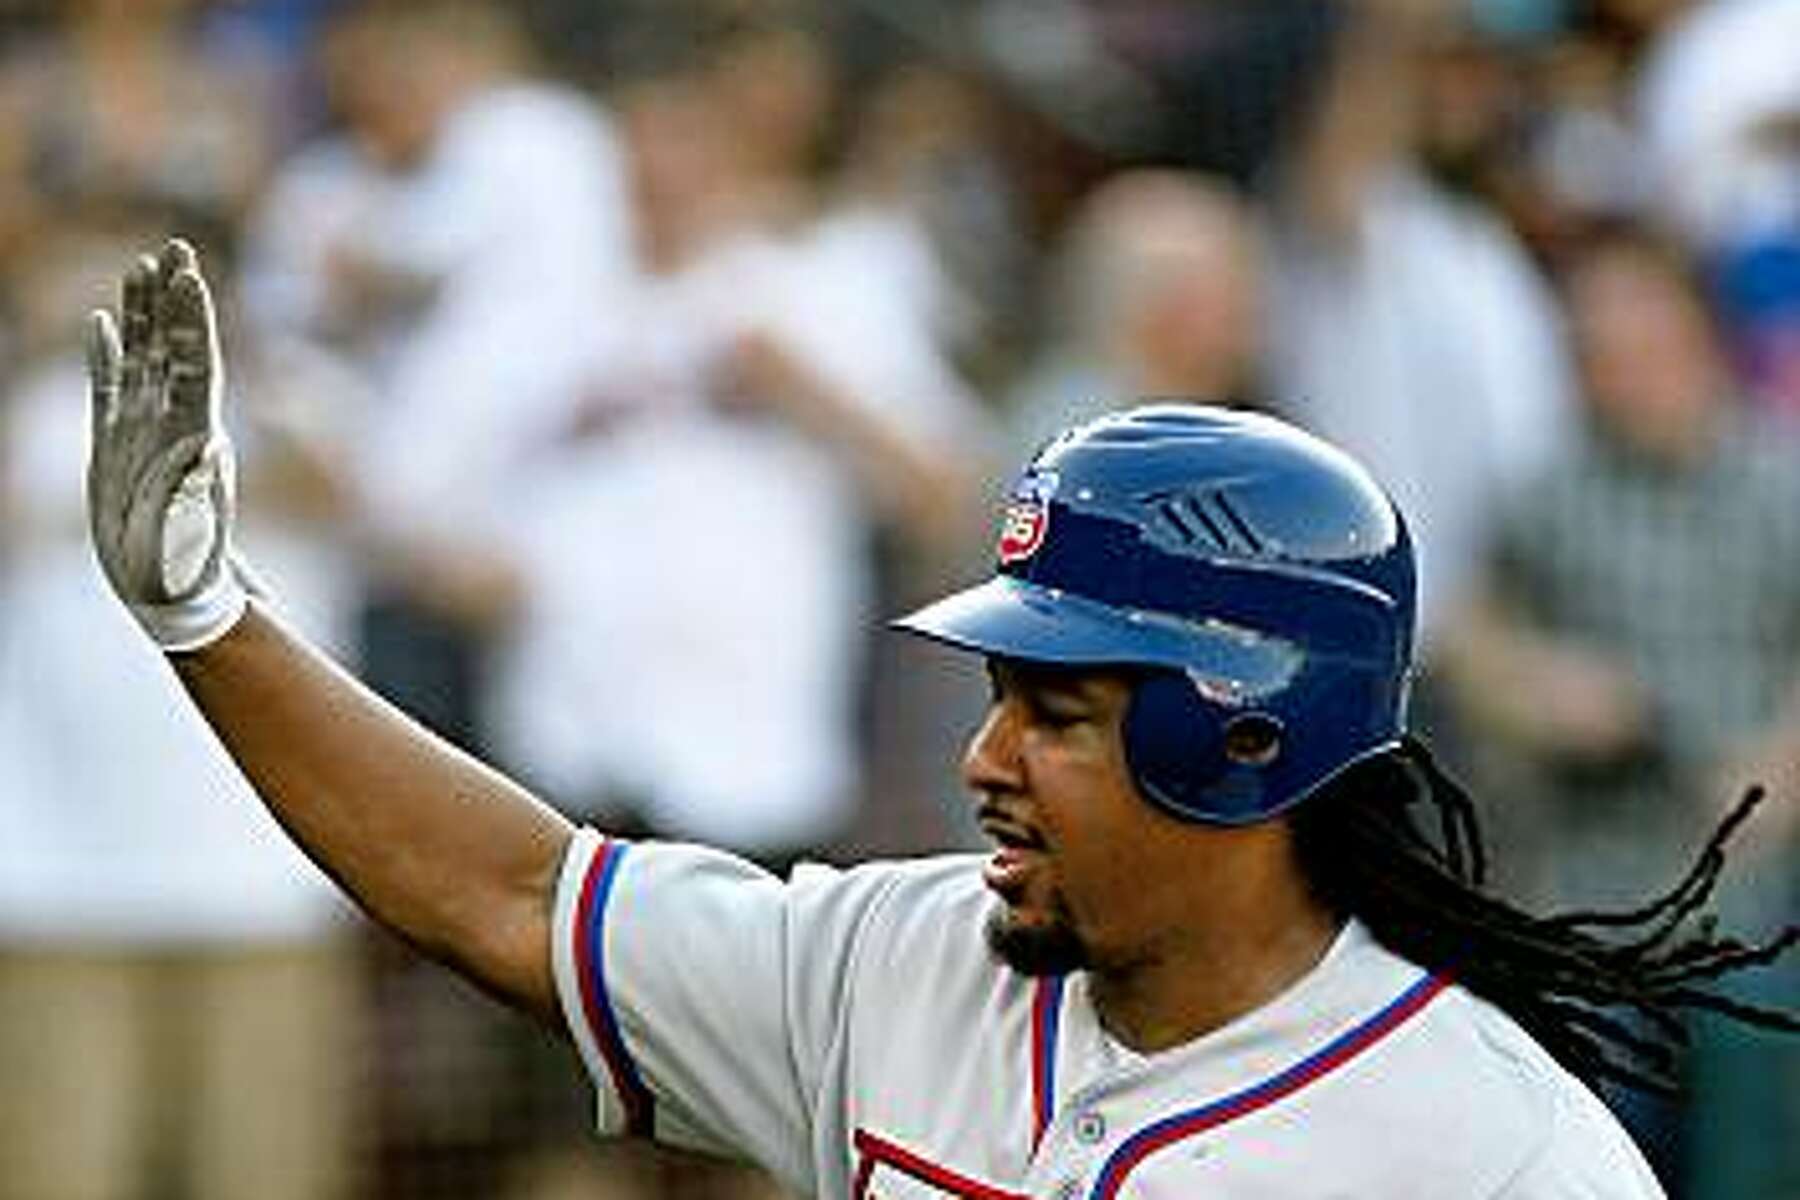 Manny Ramirez comes to town - Los Angeles Times